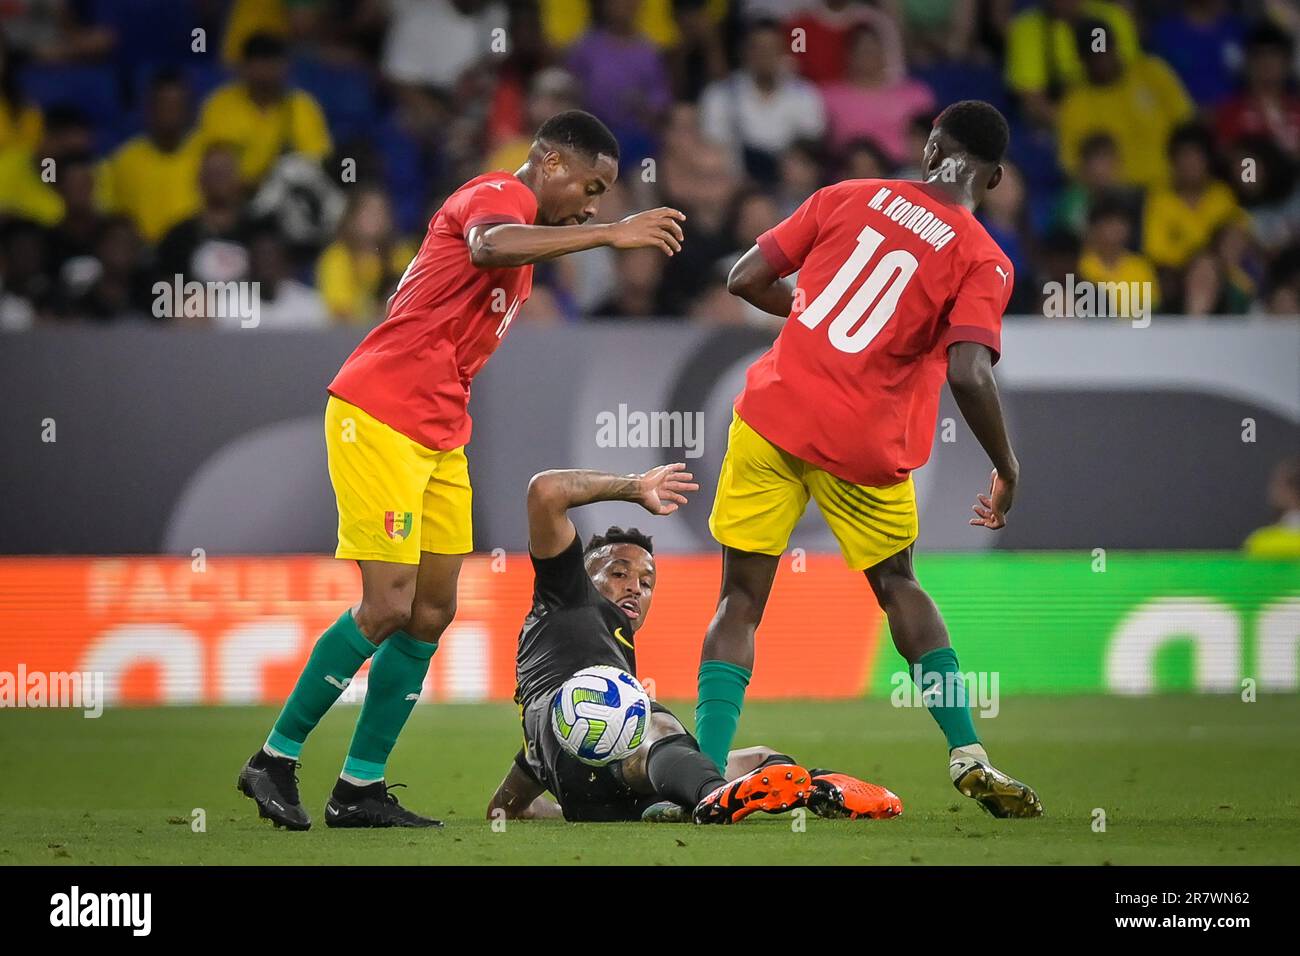 Barcelona, Spain. 17th June, 2023. Vinicius Jr. (Brazil) and Eder Militao (Brazil) during a International Frendly match between Brazil and Guinea at Stage Front Stadium, in Barcelona, Spain on June 17, 2023. (Photo/Felipe Mondino) Credit: Live Media Publishing Group/Alamy Live News Stock Photo